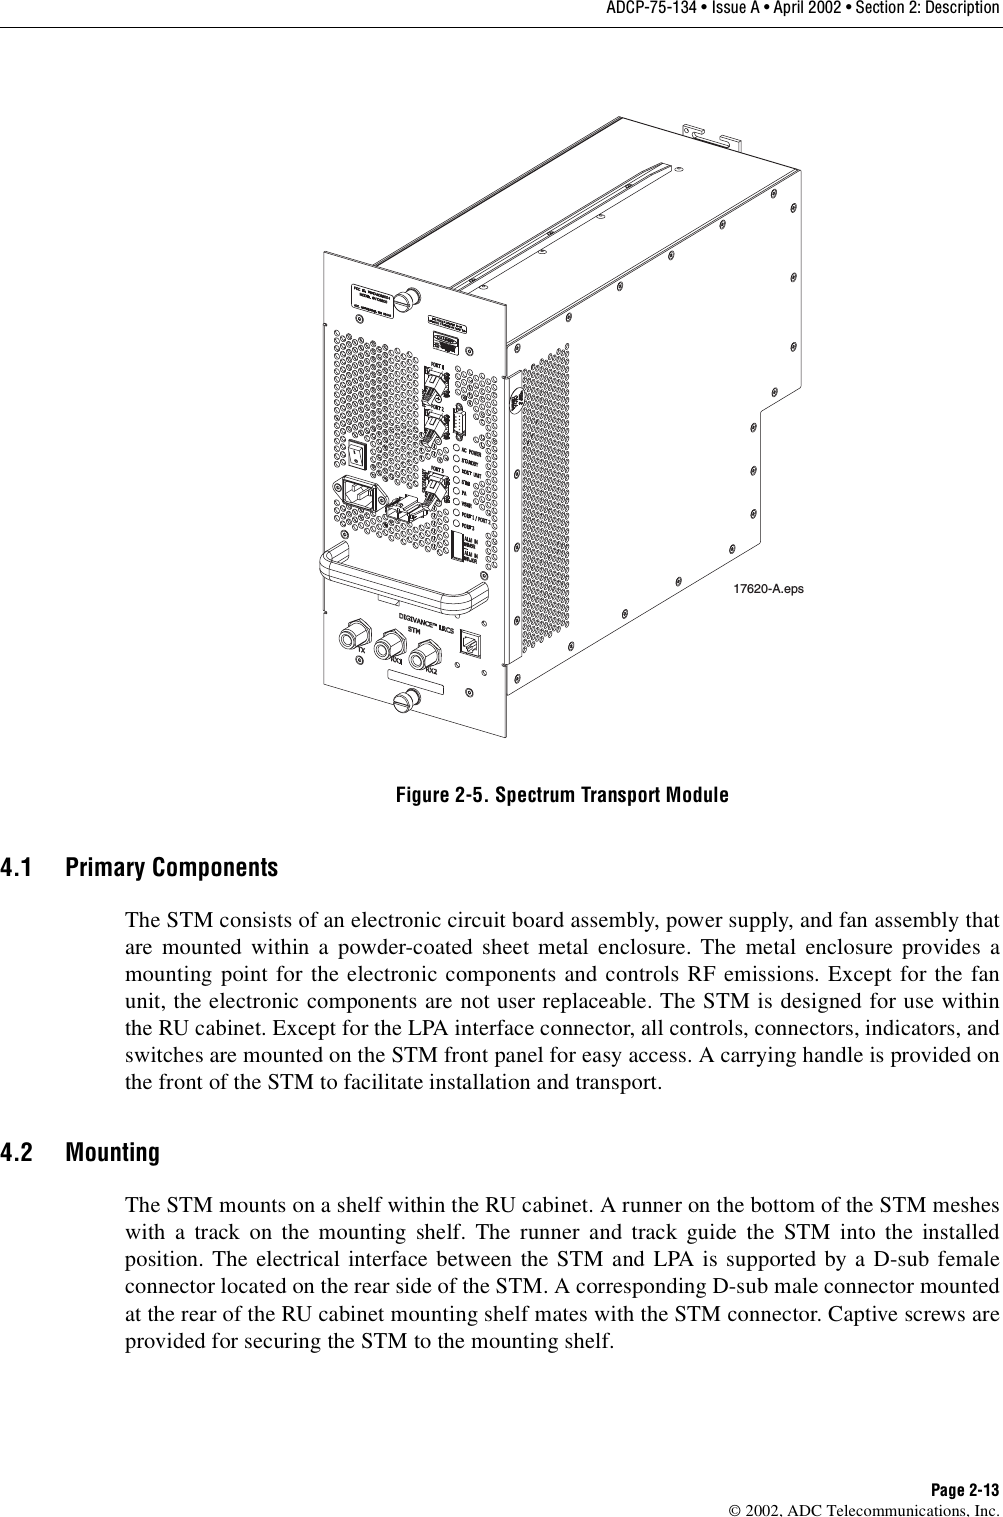 ADCP-75-134 • Issue A • April 2002 • Section 2: DescriptionPage 2-13©2002, ADC Telecommunications, Inc.Figure 2-5. Spectrum Transport Module4.1 Primary ComponentsThe STM consists of an electronic circuit board assembly, power supply, and fan assembly thatare mounted within apowder-coated sheet metal enclosure. The metal enclosure provides amounting point for the electronic components and controls RF emissions. Except for the fanunit, the electronic components are not user replaceable. The STM is designed for use withinthe RU cabinet. Except for the LPA interface connector, all controls, connectors, indicators, andswitches are mounted on the STM front panel for easy access. Acarrying handle is provided onthe front of the STM to facilitate installation and transport.4.2 MountingThe STM mounts on ashelf within the RU cabinet. Arunner on the bottom of the STM mesheswith atrack on the mounting shelf. The runner and track guide the STM into the installedposition. The electrical interface between the STM and LPA is supported by aD-sub femaleconnector located on the rear side of the STM. Acorresponding D-sub male connector mountedat the rear of the RU cabinet mounting shelf mates with the STM connector. Captive screws areprovided for securing the STM to the mounting shelf.17620-A.eps